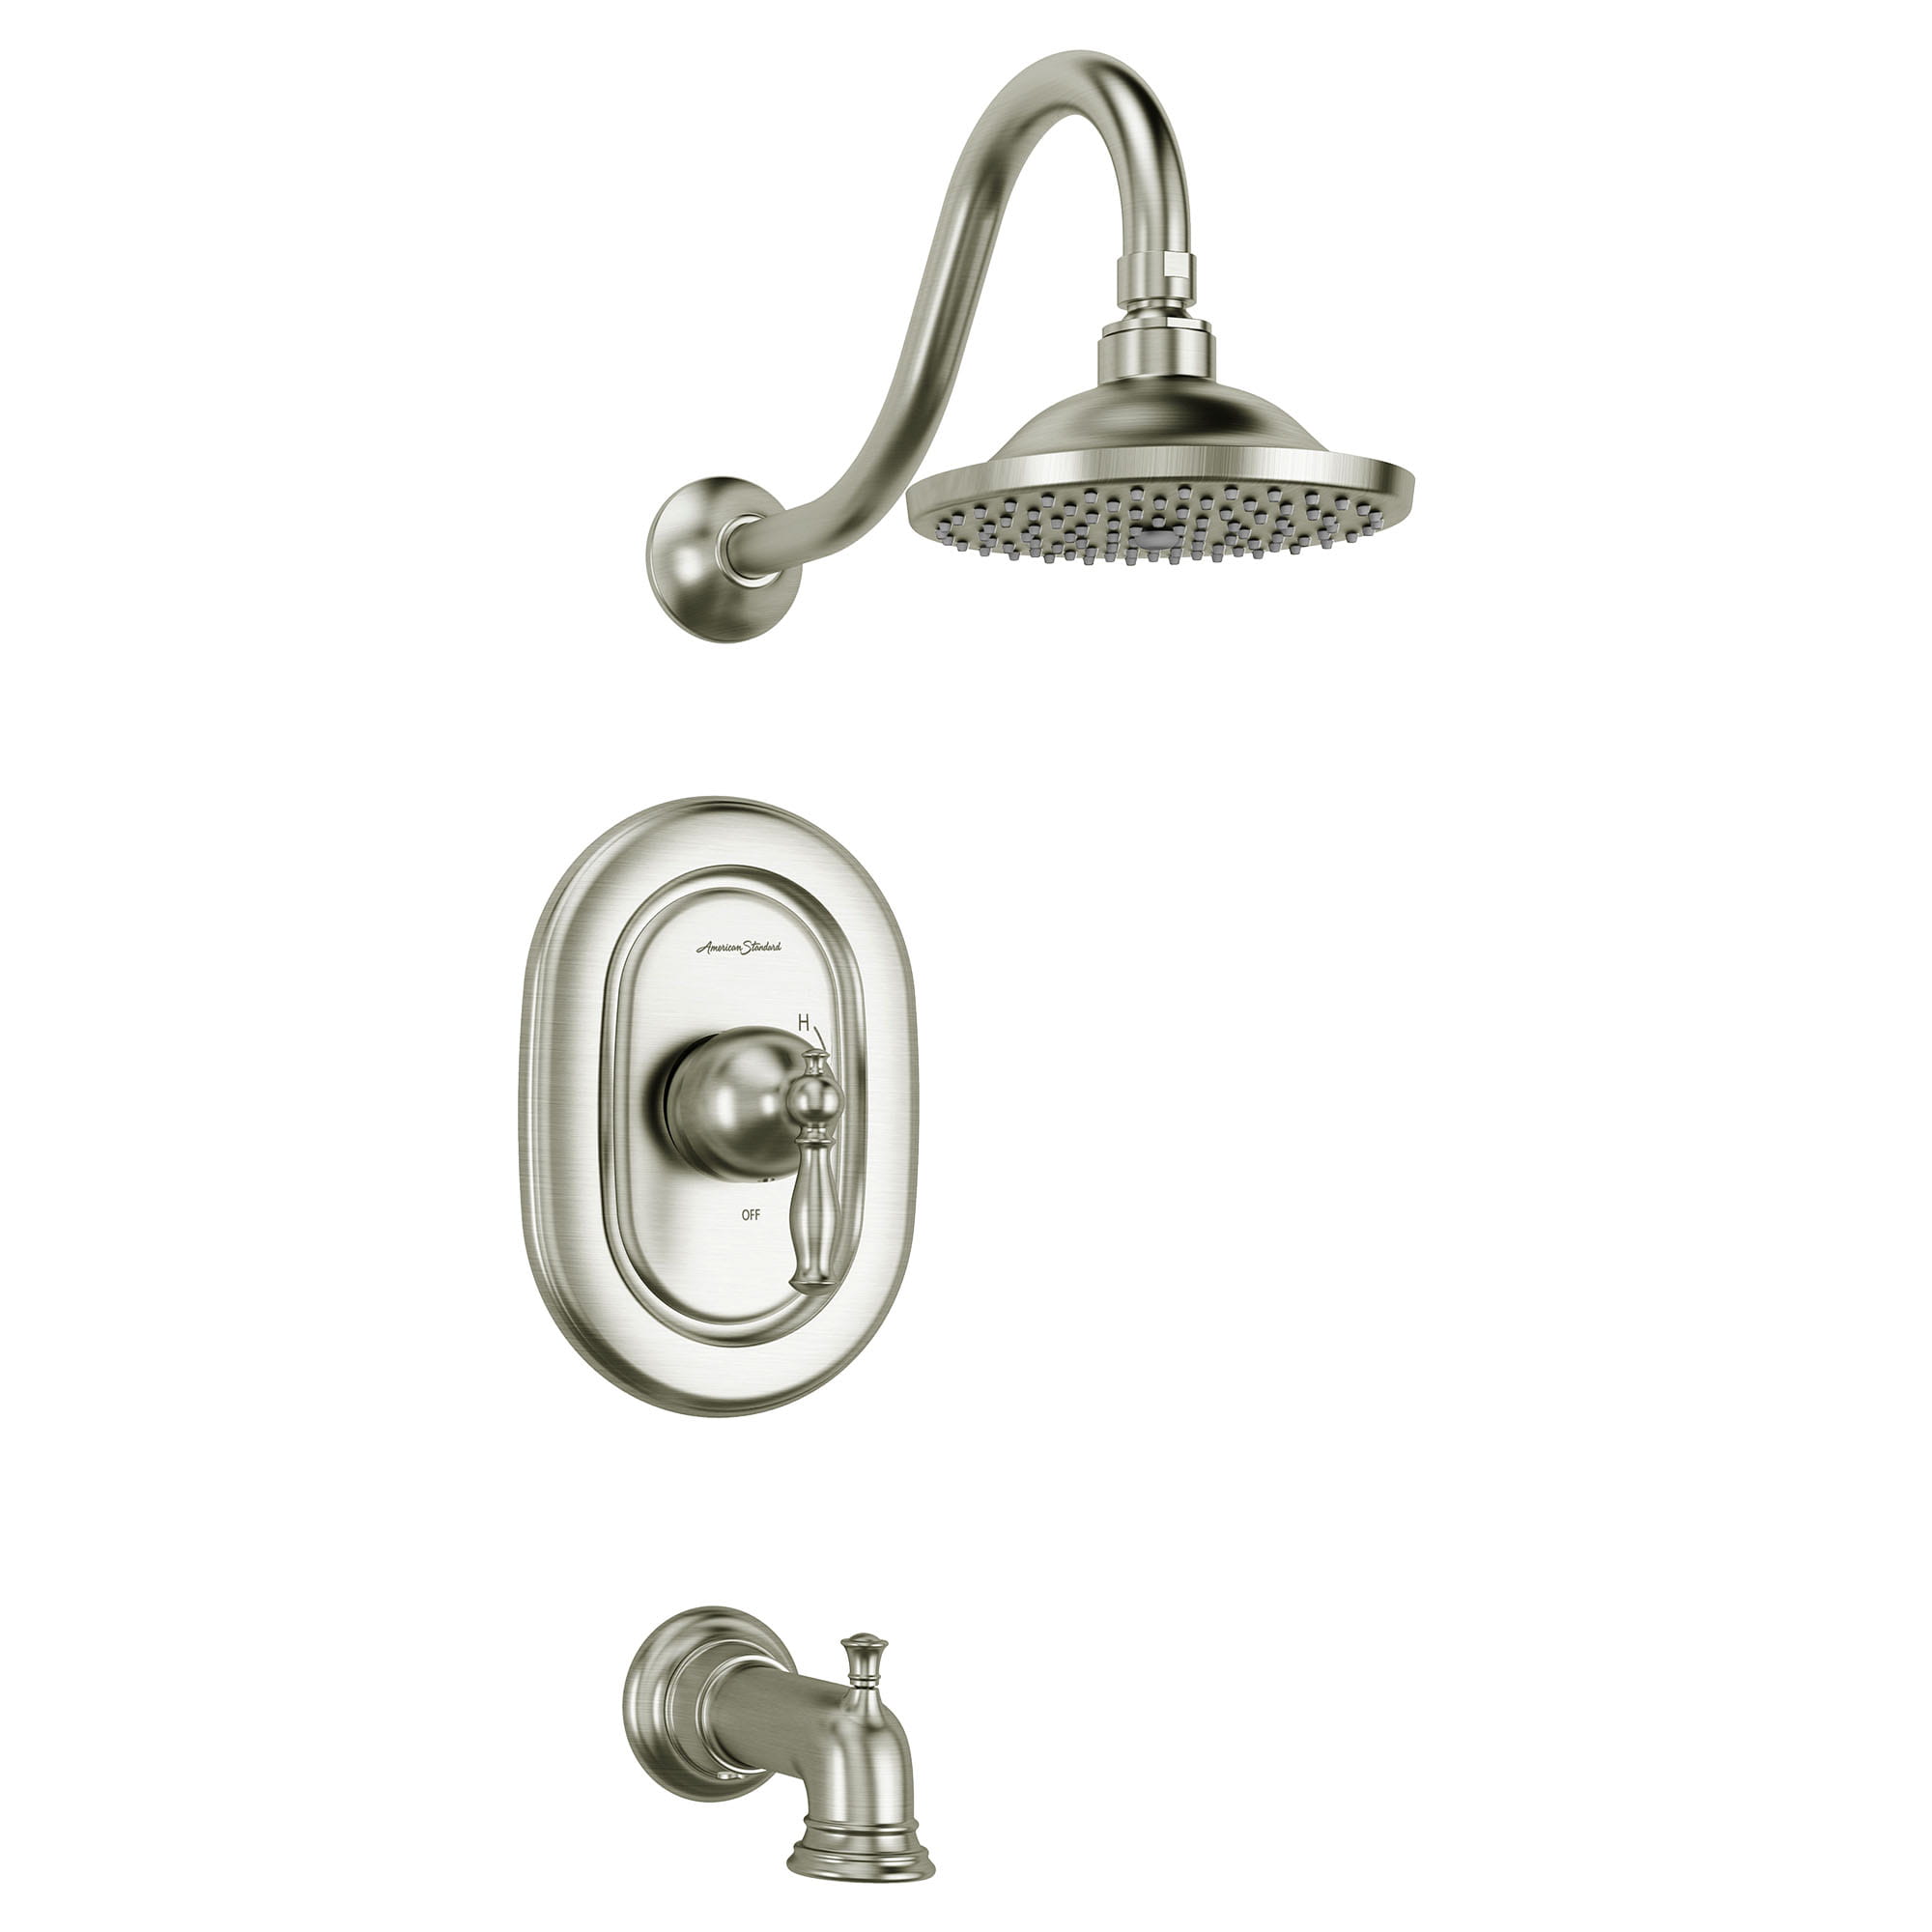 Quentin 25 gpm 95 L min Tub and Shower Trim Kit With Rain Showerhead Double Ceramic Pressure Balance Cartridge With Lever Handle   BRUSHED NICKEL